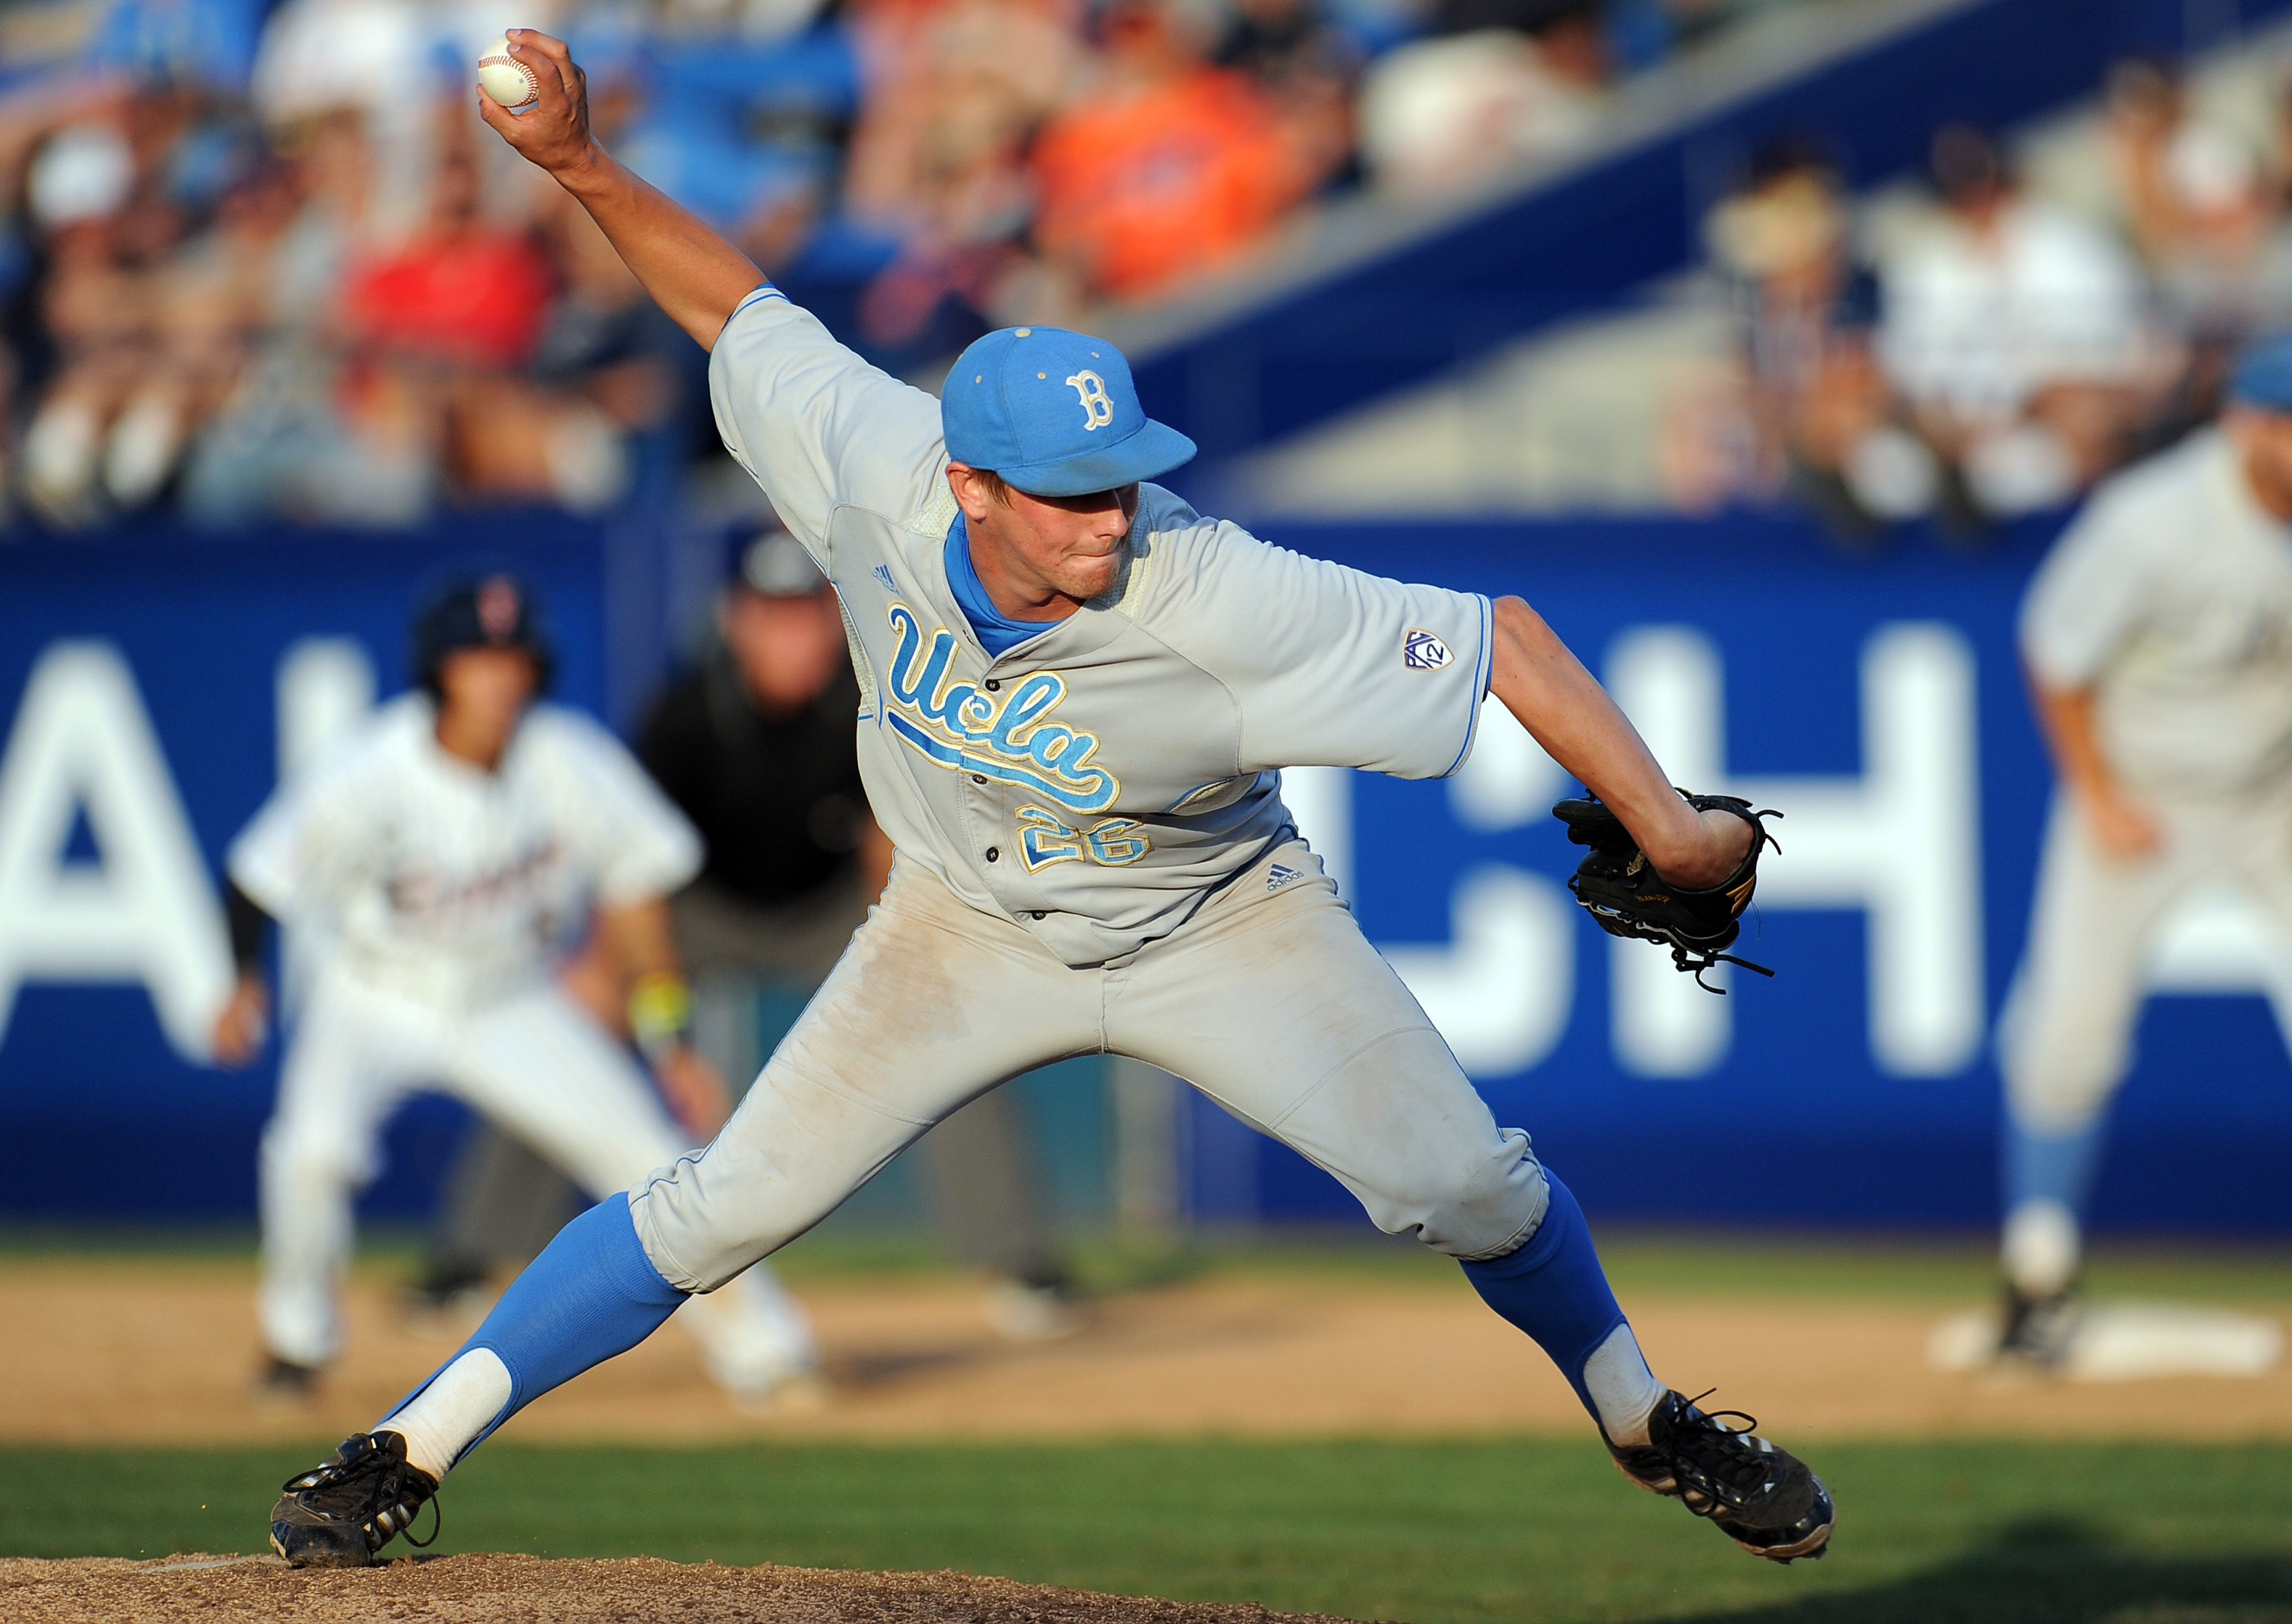 UCLA closer David Berg pitches against Cal State Fullerton in the NCAA Super Regionals on June 7, 2013. Berg won the first of his two NCBWA Stopper of the Year awards later that month. (Keith Birmingham/Staff)